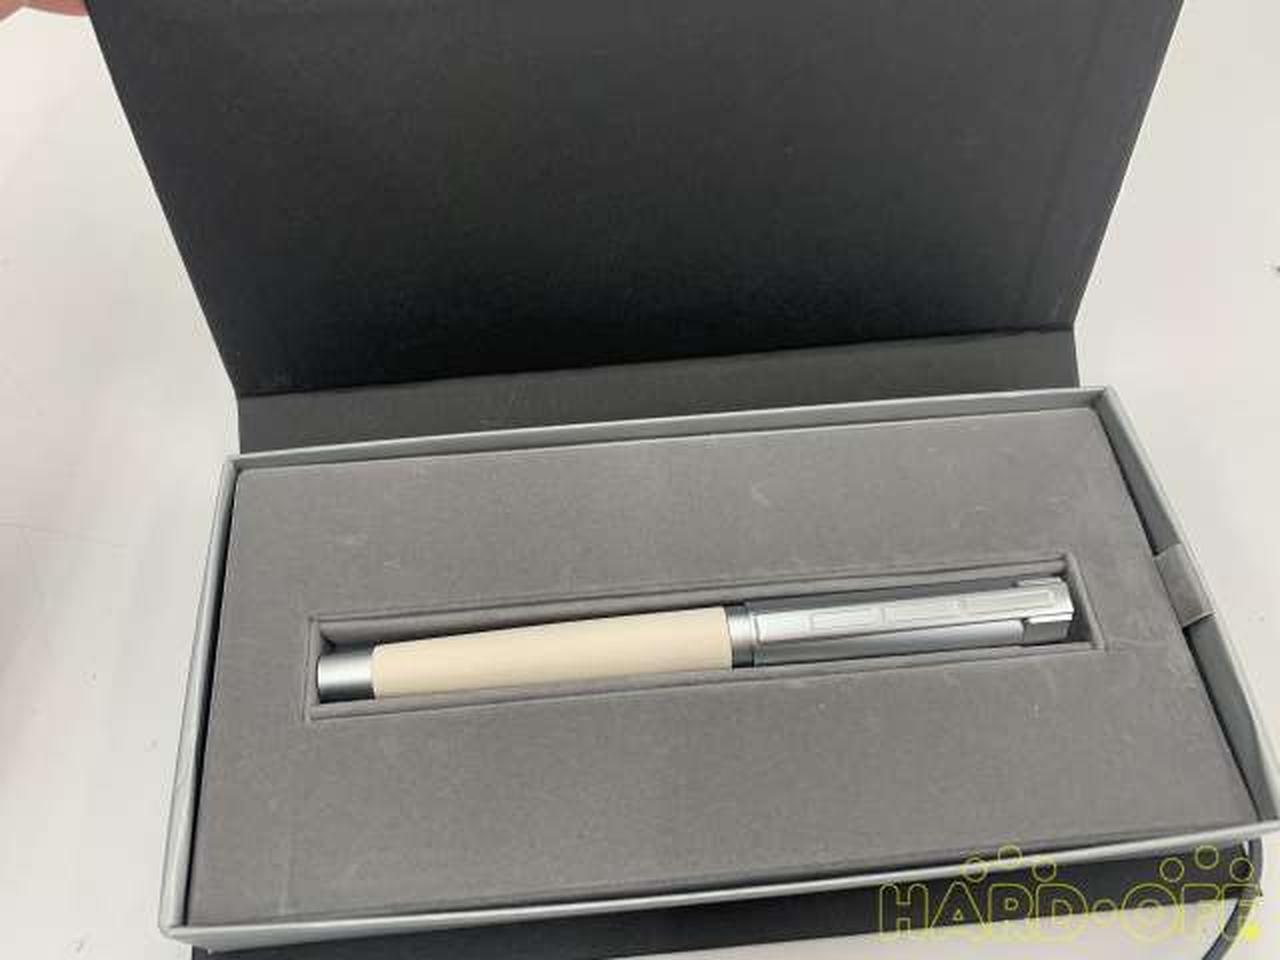 fountain pen Brand Staedtler from Japan